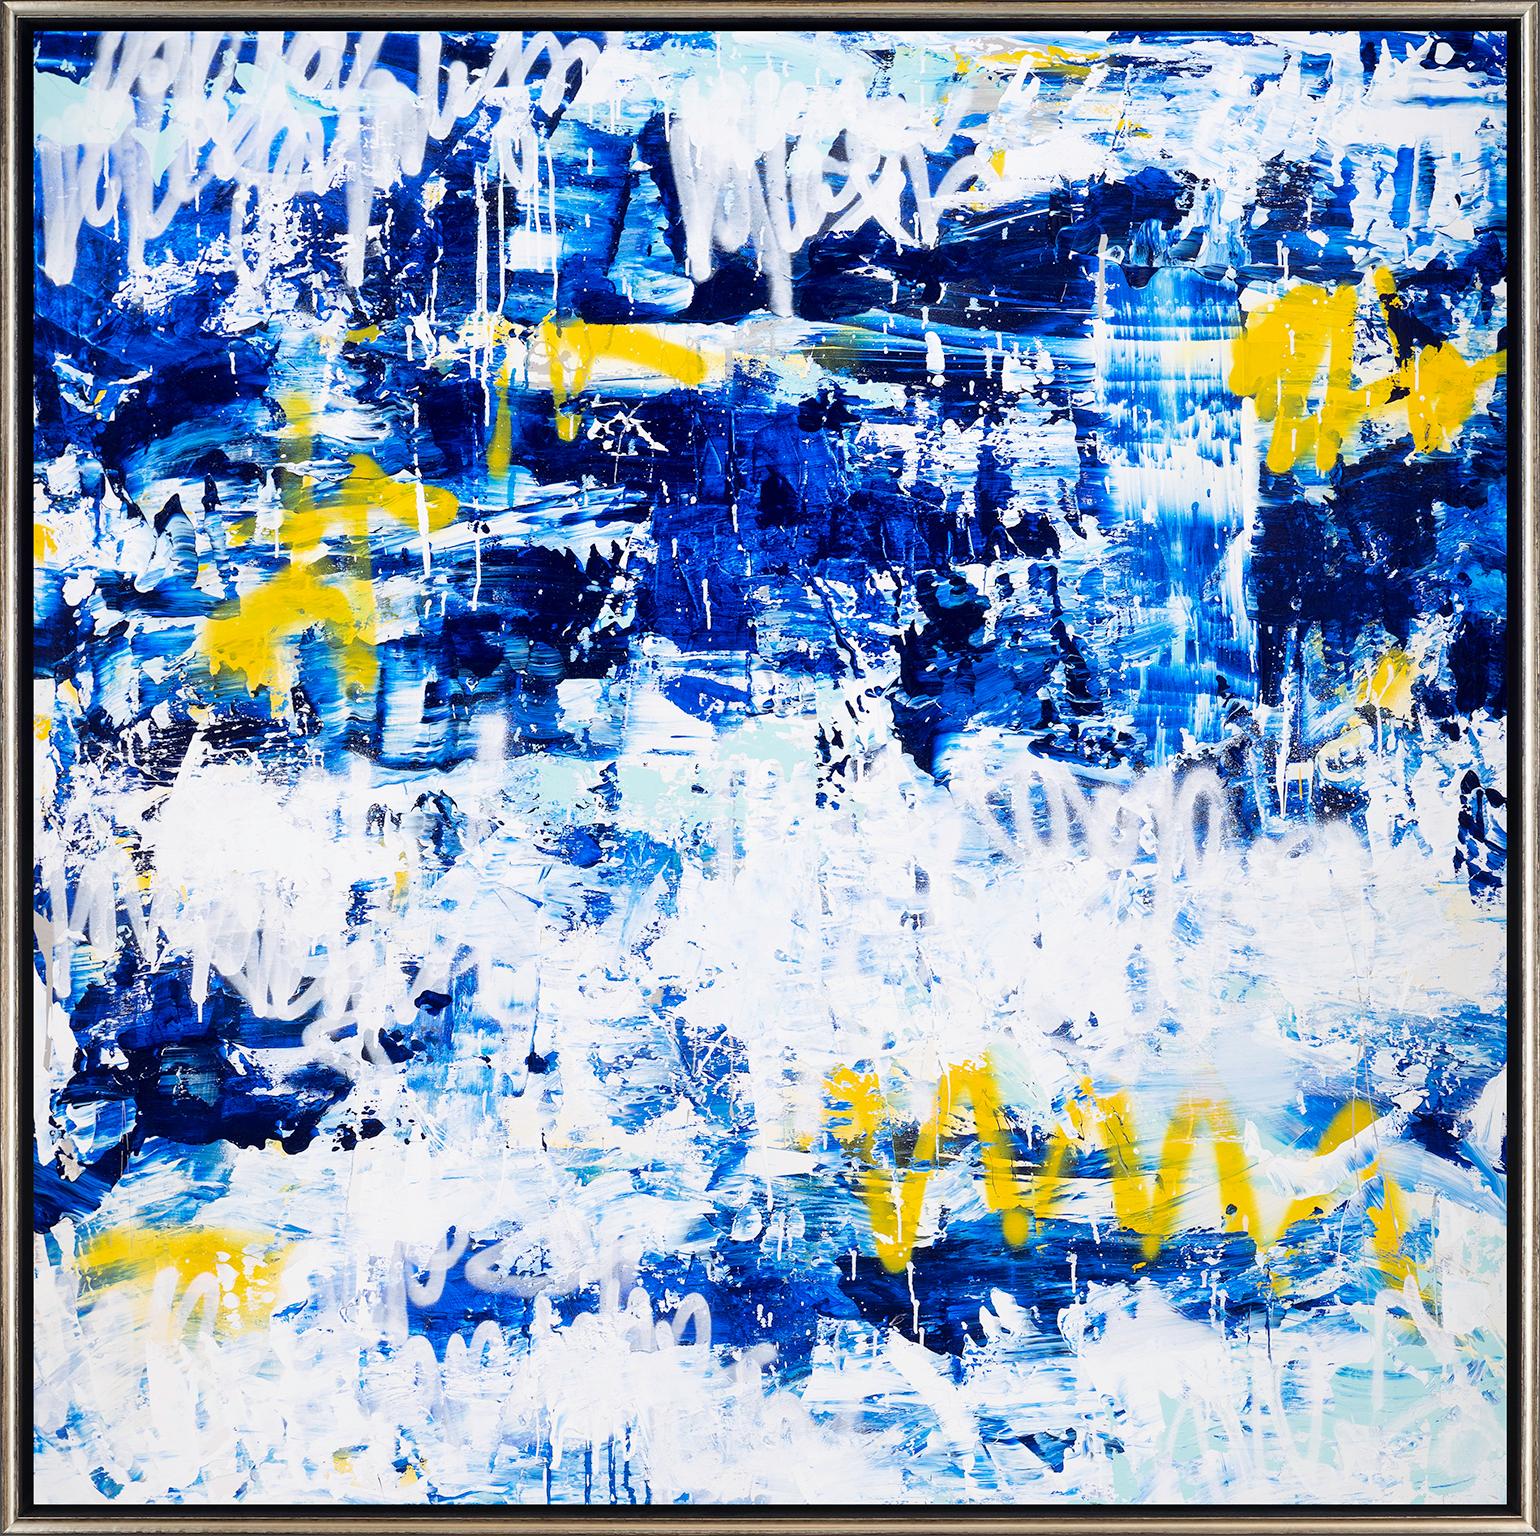 Amber Goldhammer Abstract Painting - "The Love Crusade" Framed Abstract Mixed Media on Canvas Painting in Blues